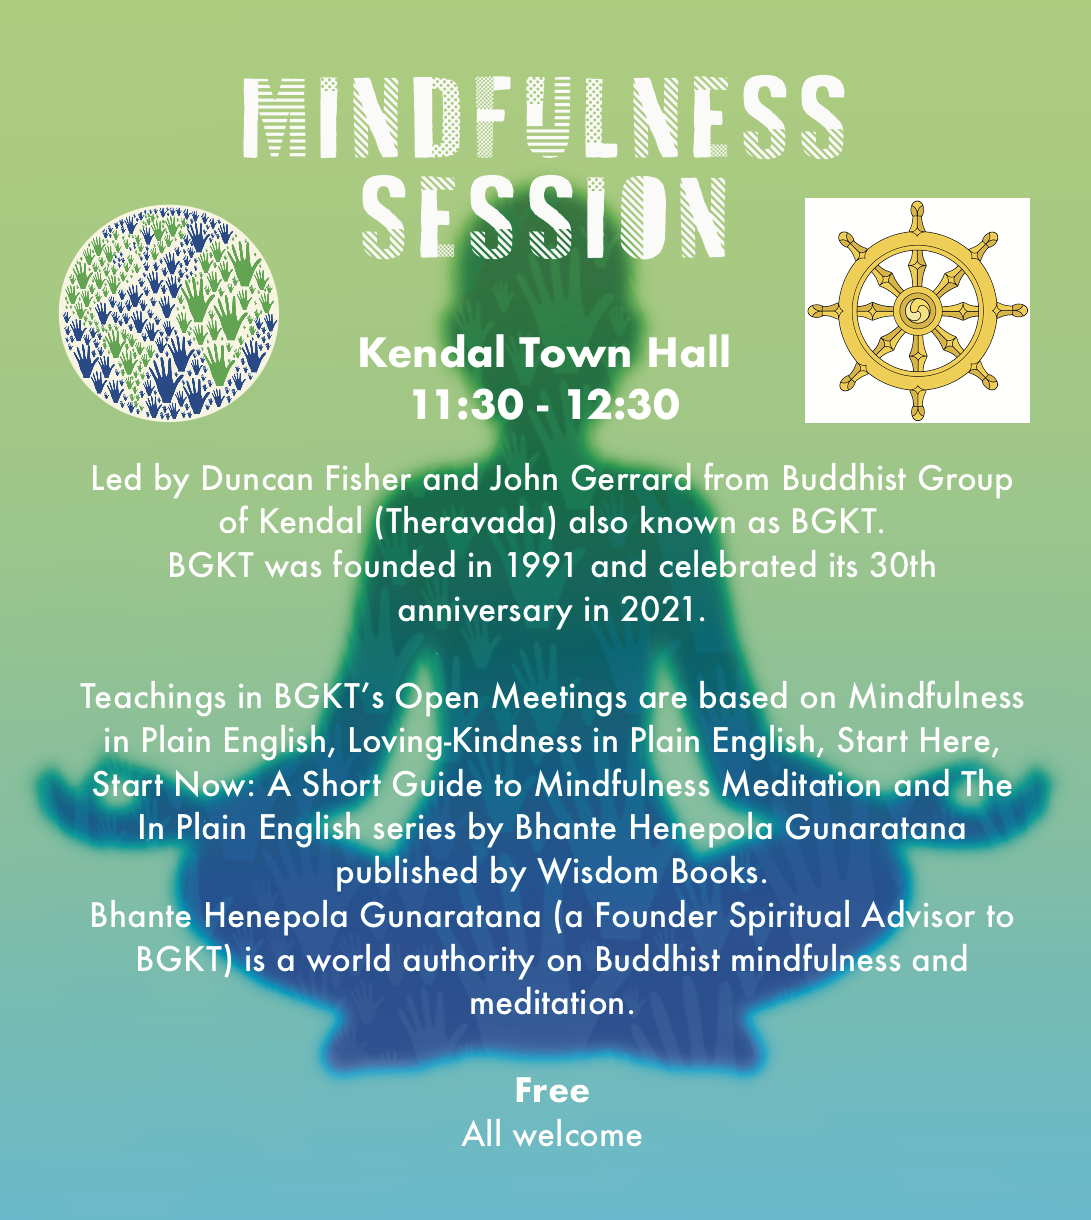 Kendal Town Hall11.30am -12.30pm Mindfulness and Meditation Session All welcome Free Led by Duncan Fisher and John Gerrard from Buddhist Group of Kendal Theravada (BGKT).  BGKT was founded in 1991 and celebrated its 30th anniversary in 2021. Teachings in BGKT’s Open Meetings are based on Mindfulness in Plain English, Loving-Kindness in Plain English, Start Here, Start Now: A Short Guide to Mindfulness Meditation and The In Plain English series by Bhante Henepola Gunaratana published by Wisdom Books. Bhante Henepola Gunaratana (a Founder Spiritual Advisor to BGKT) is a world authority on Buddhist mindfulness and meditation. 